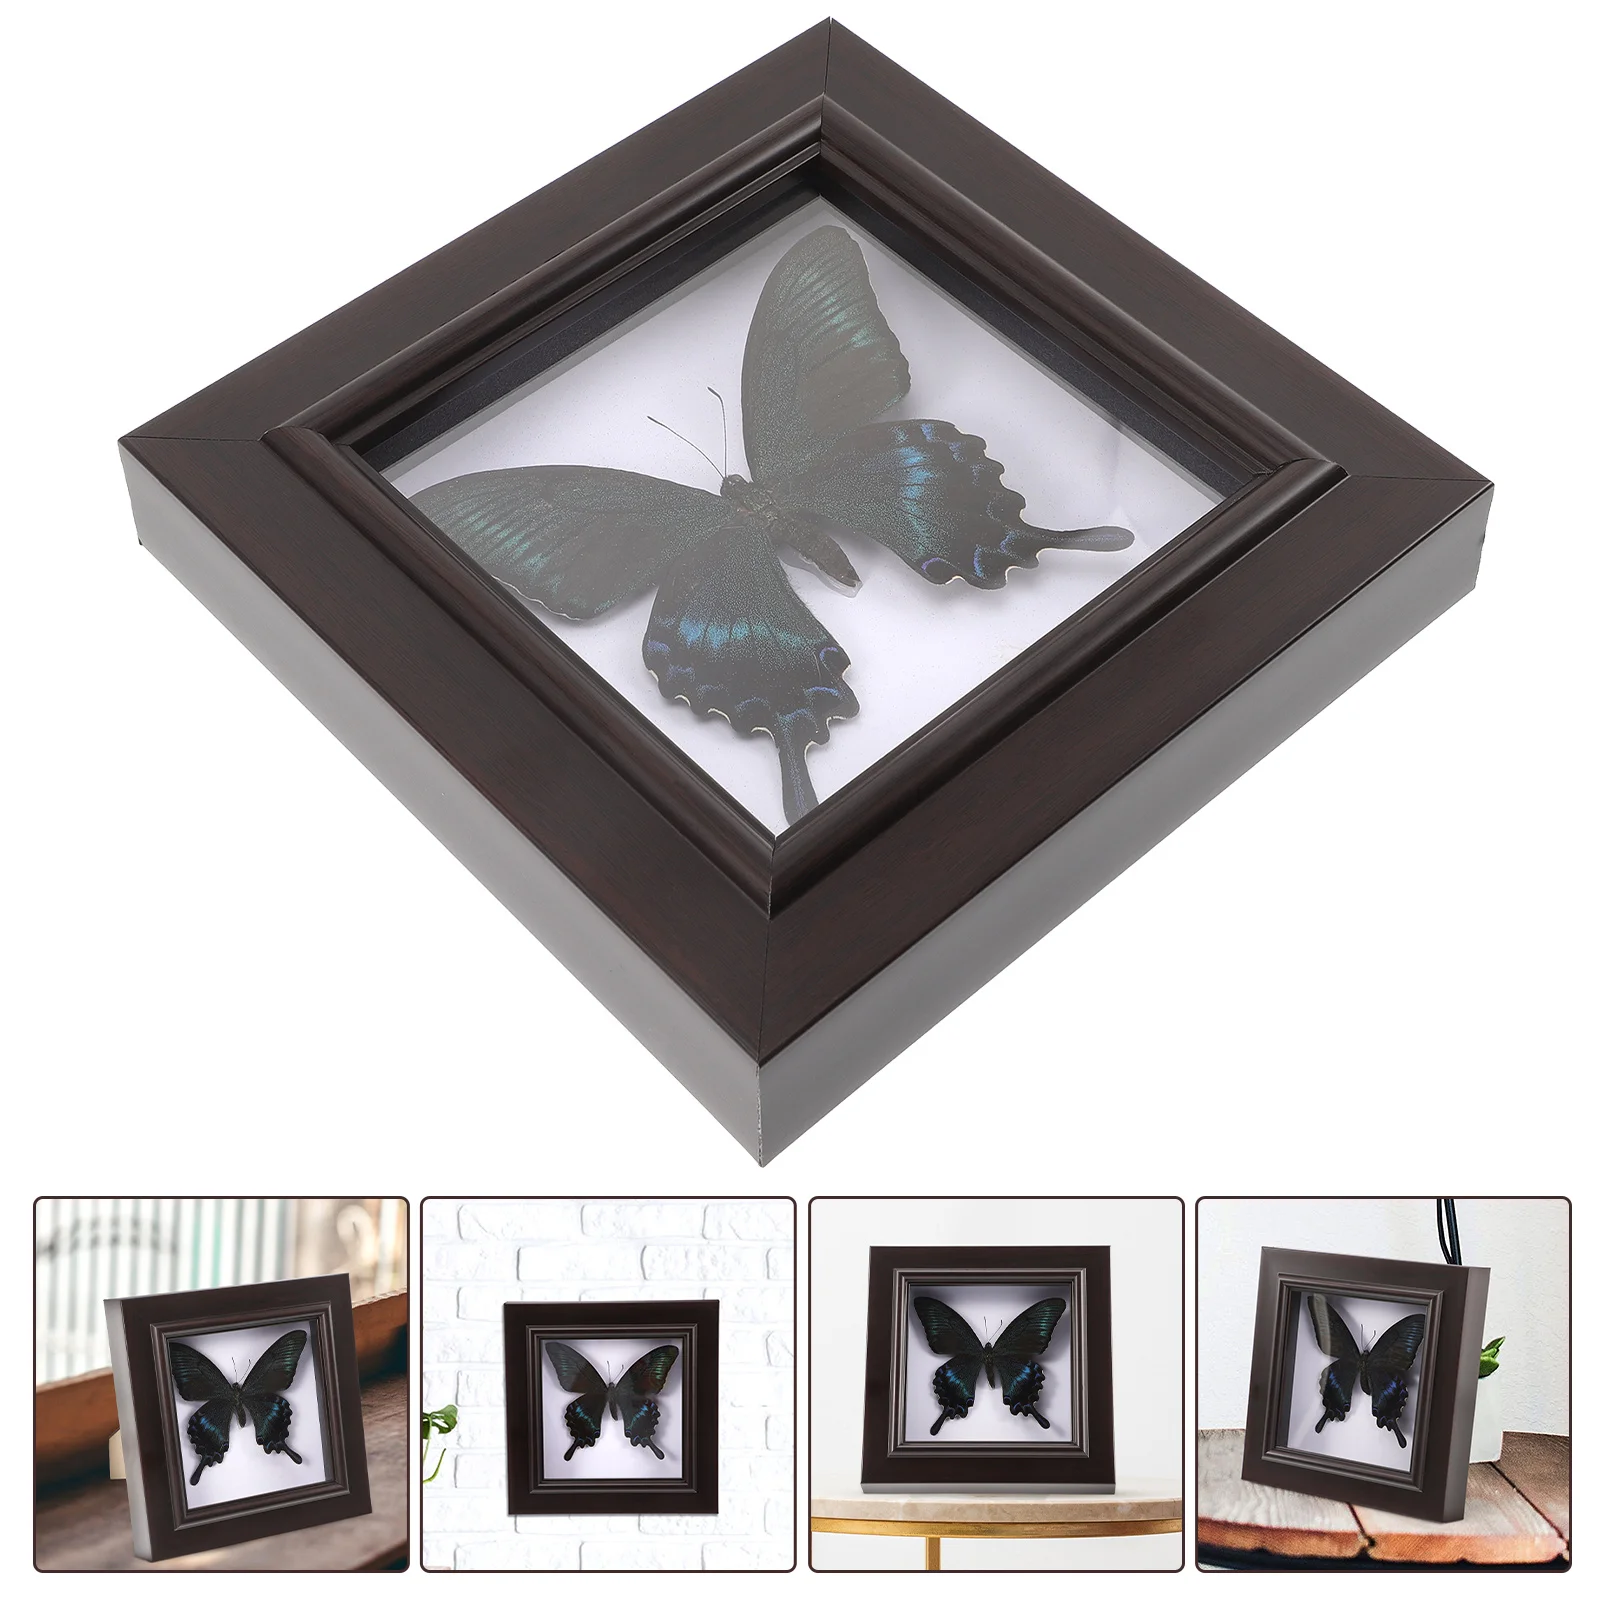 

Simulated Butterfly Specimen Handmade Rare And Exquisite Specimens Decor Wall Hanging Specimen For Education Collection Rese